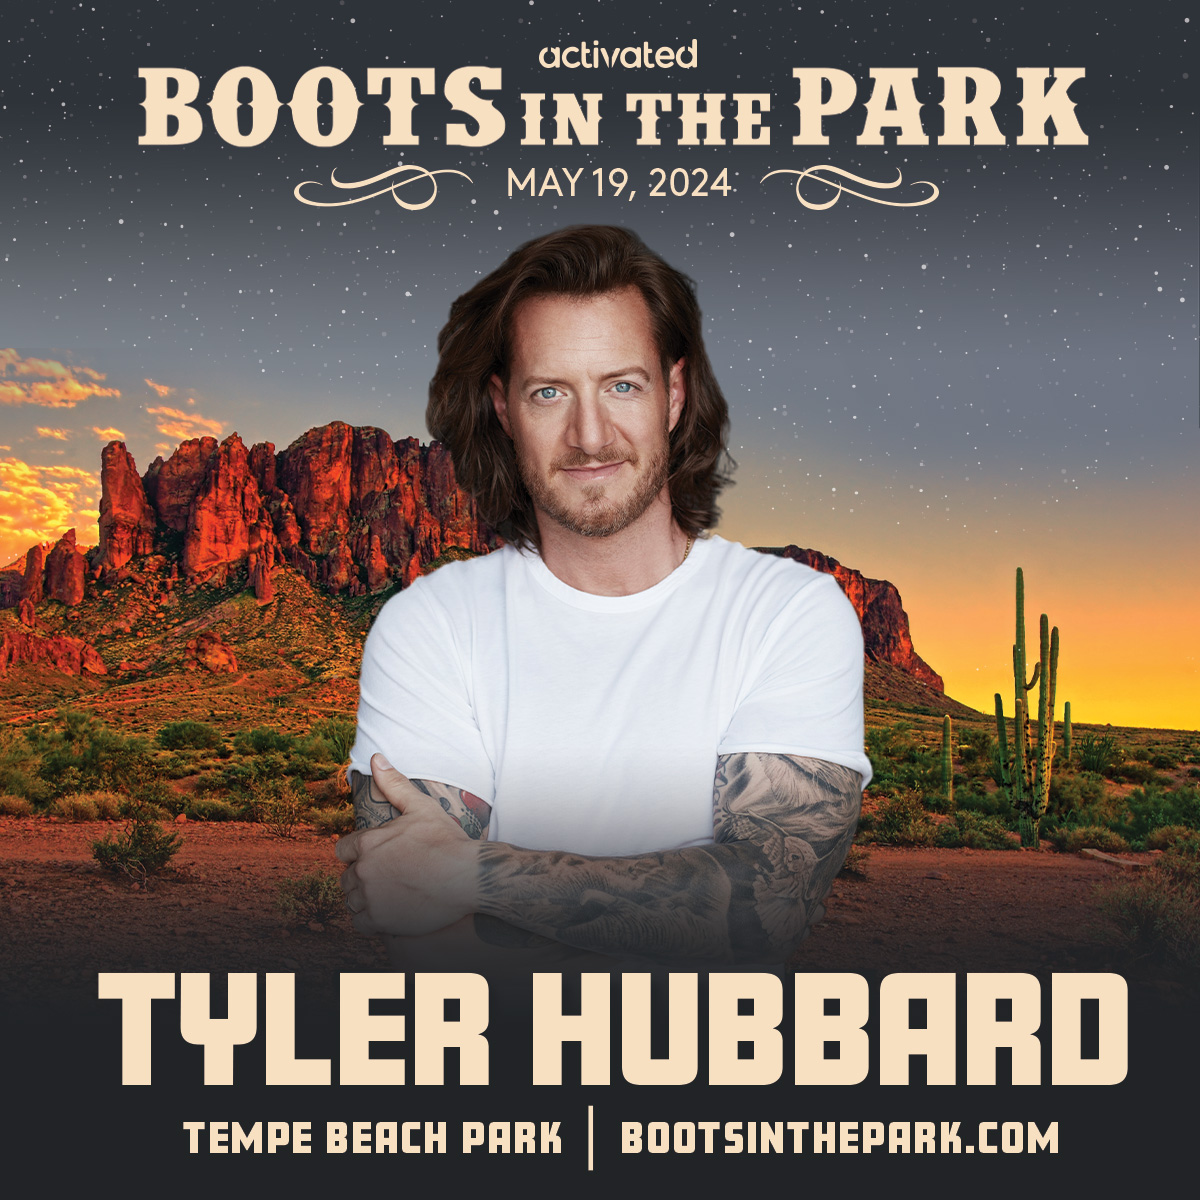 HAPPY BIRTHDAY @tylerhubbard 🥳 You can see #tylerhubbard LIVE at #bootsinthepark in Tempe this summer! Get your tickets today! #tylerhubbard #tempe #musicfestival #country #countrymusic #music